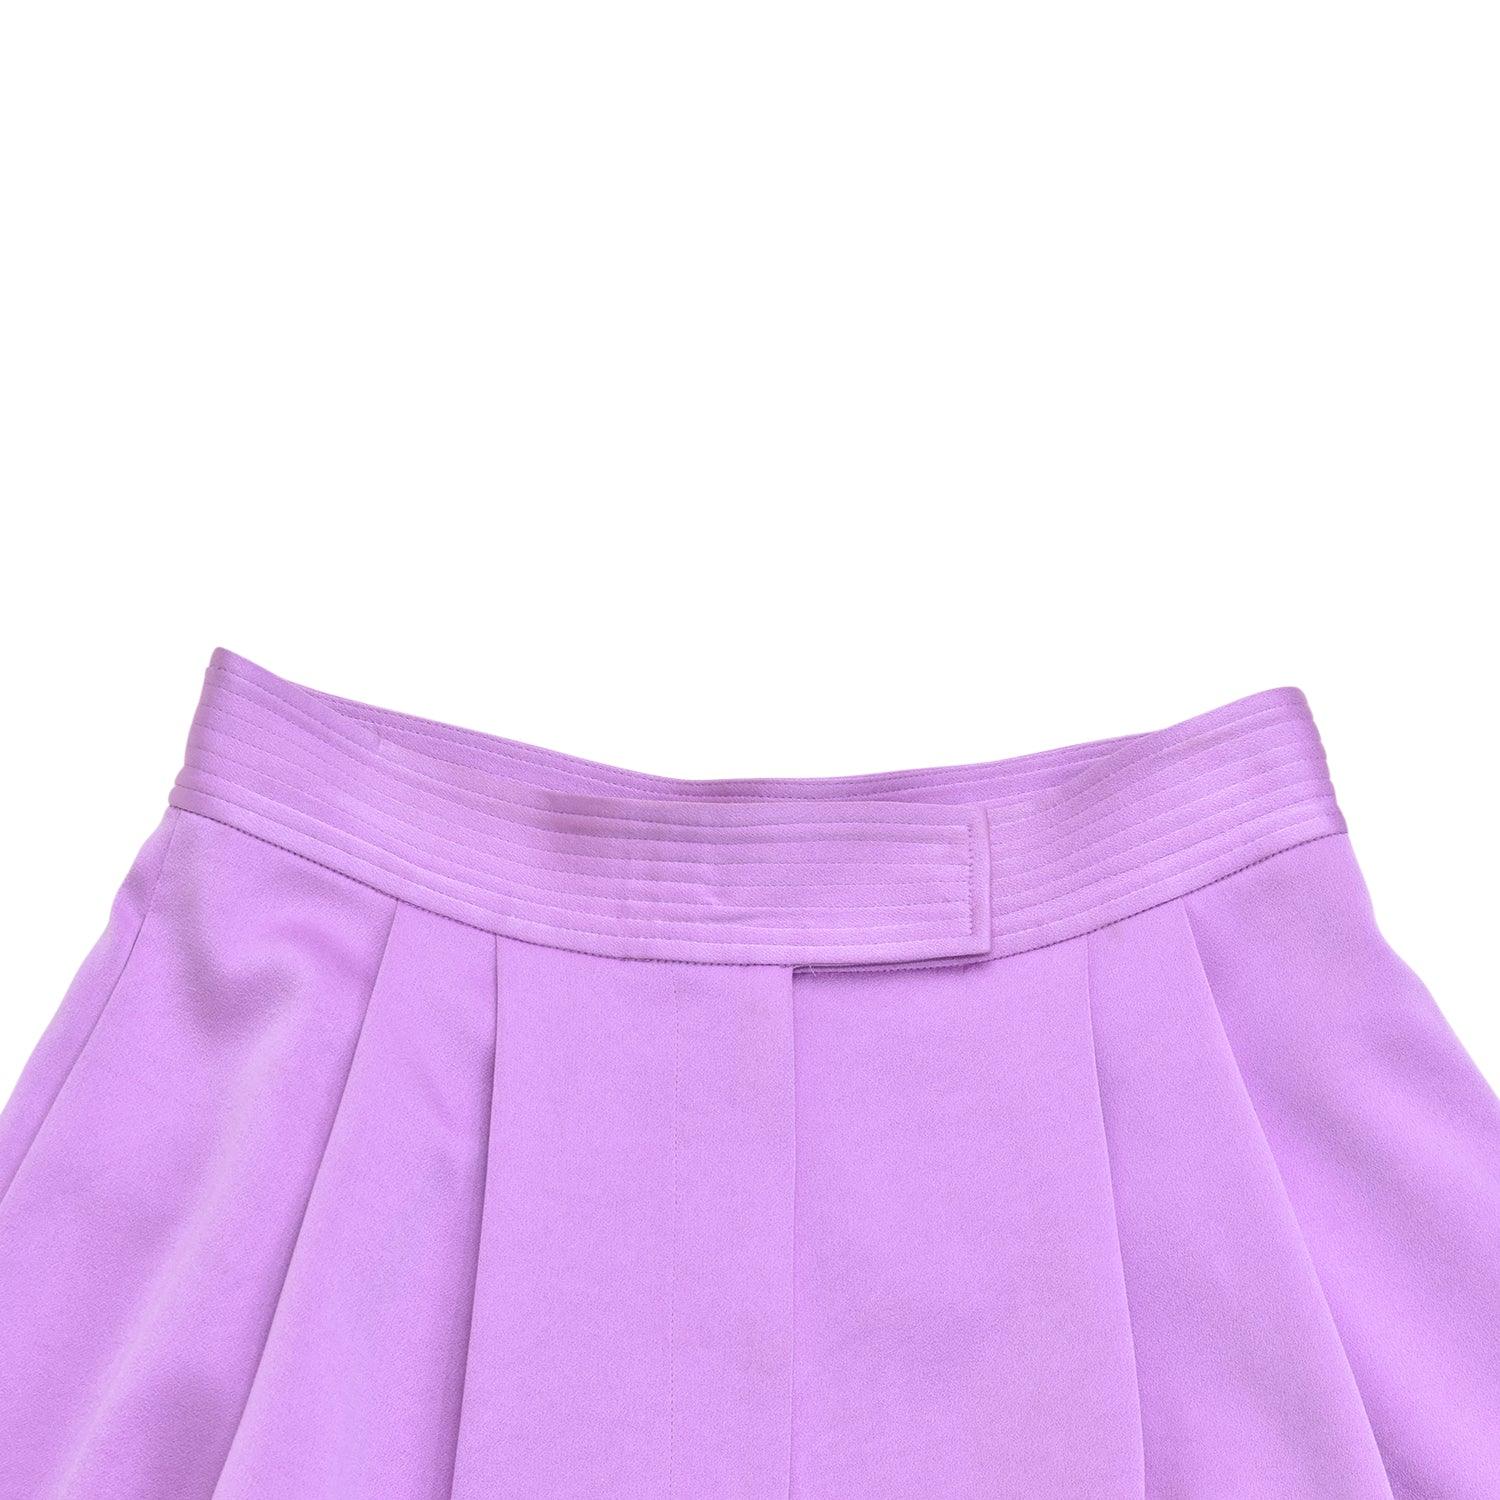 Alex Perry Skirt - Women's 4 - Fashionably Yours